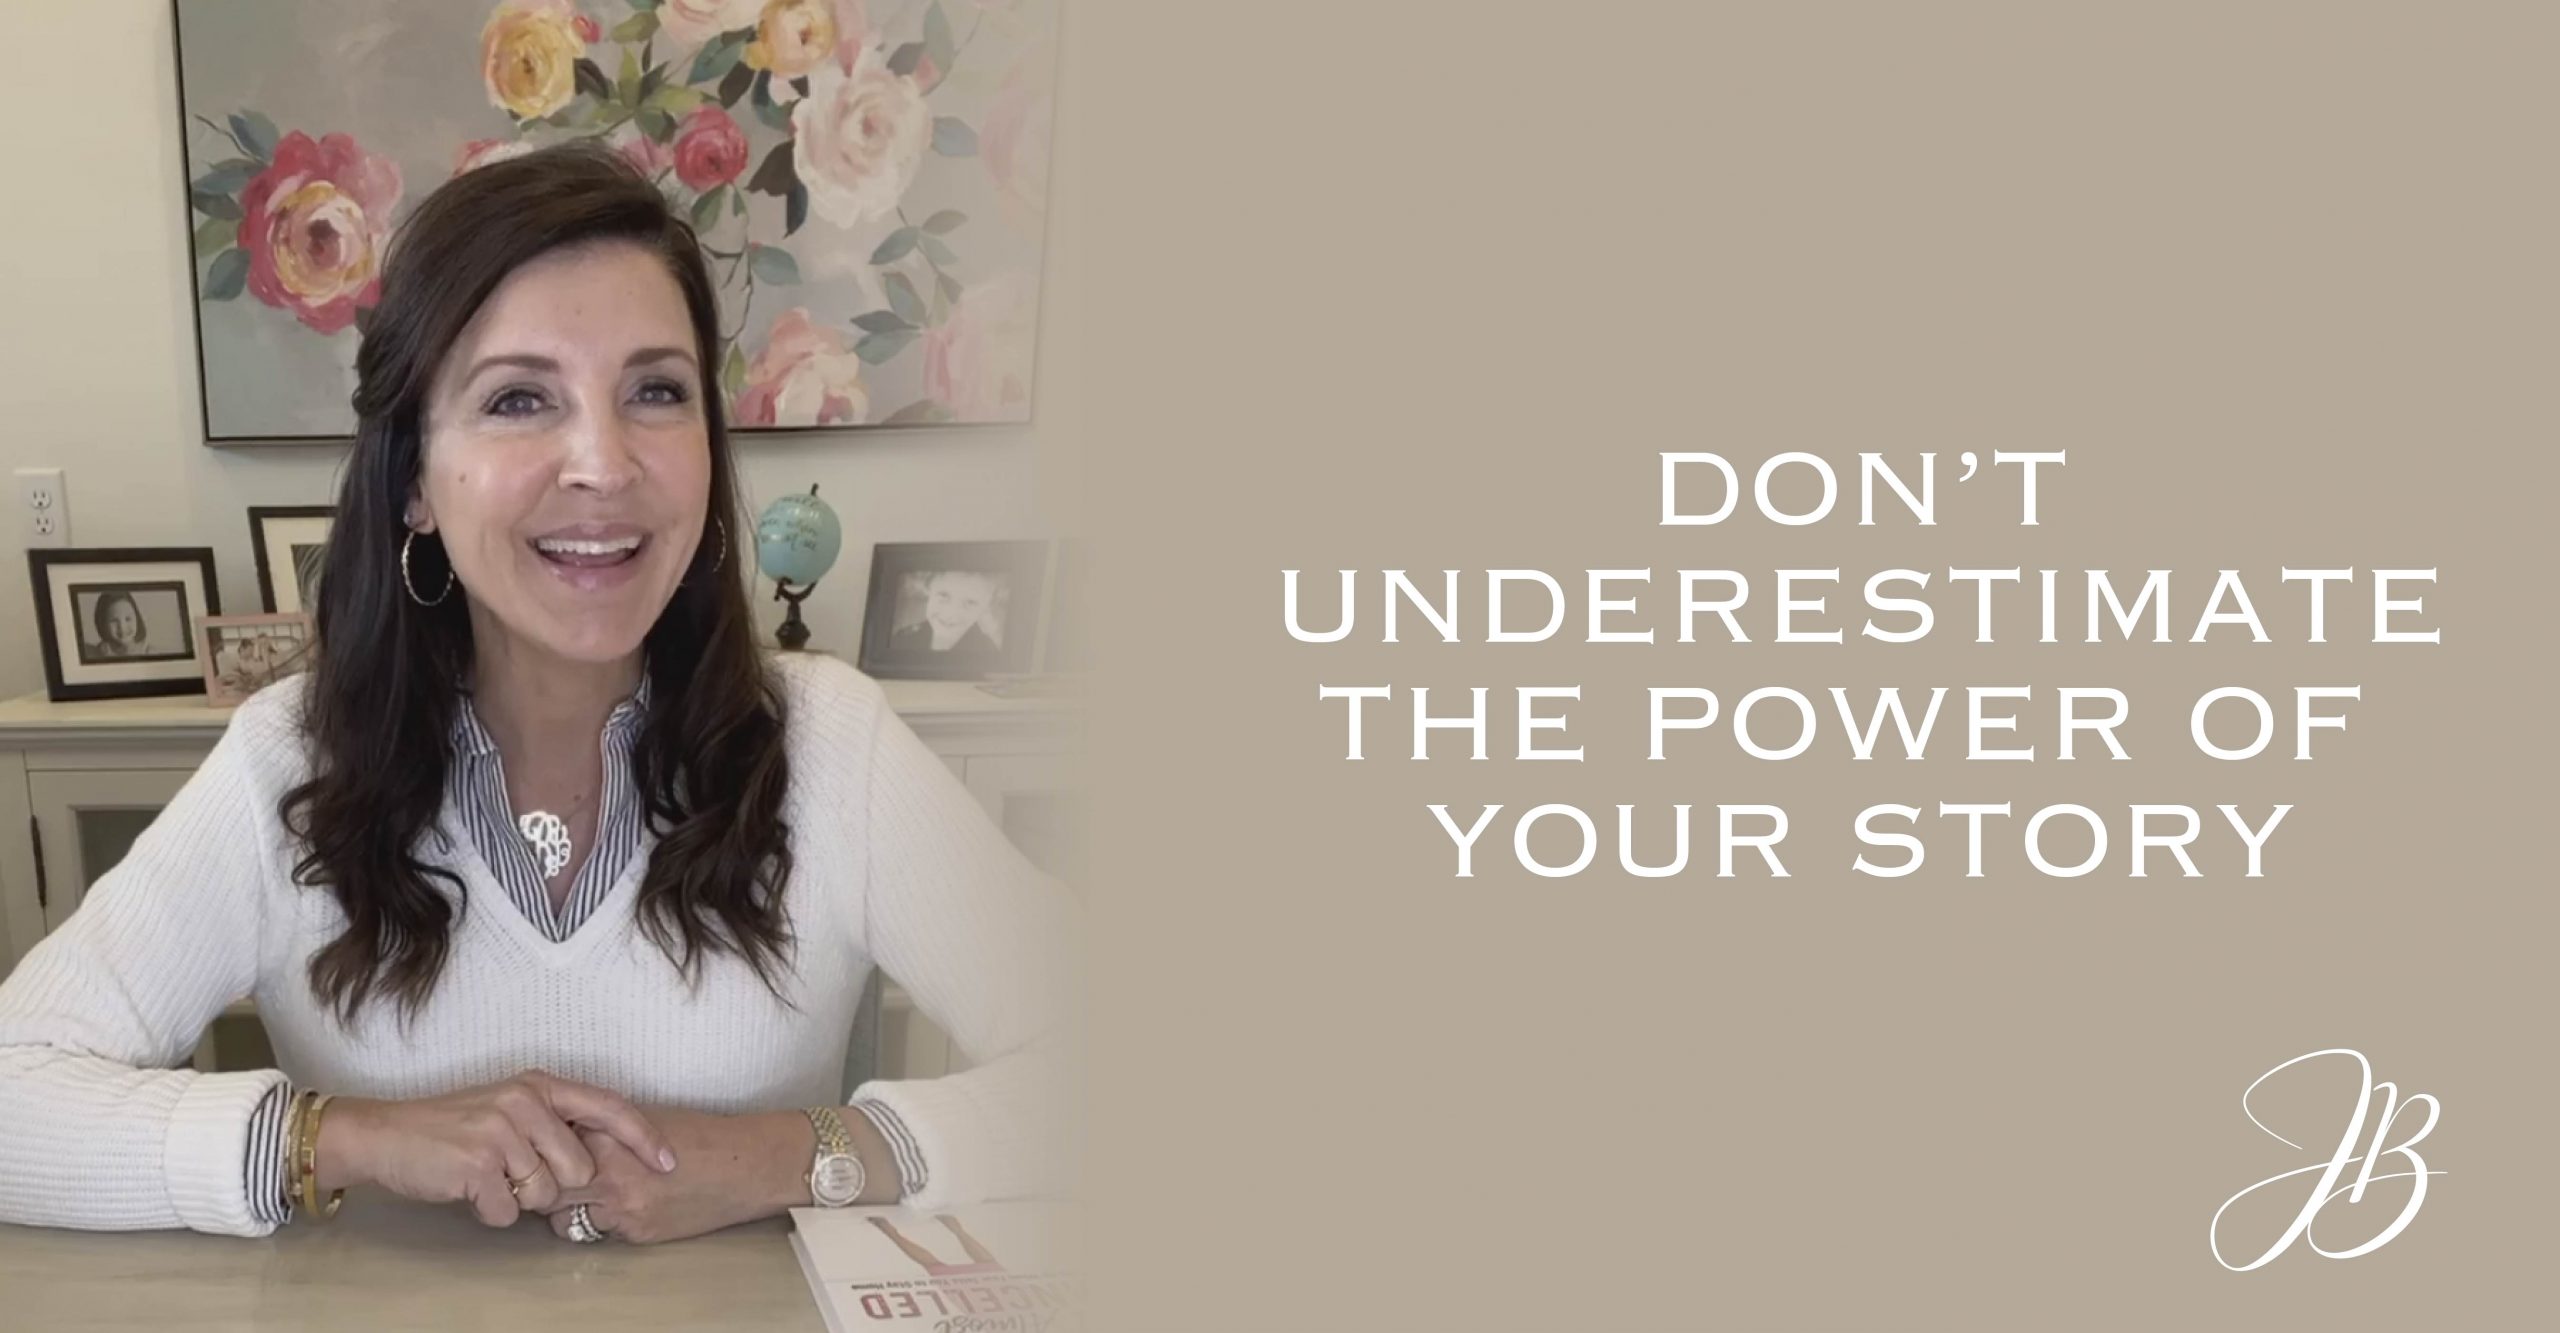 Don't underestimate the power of your story